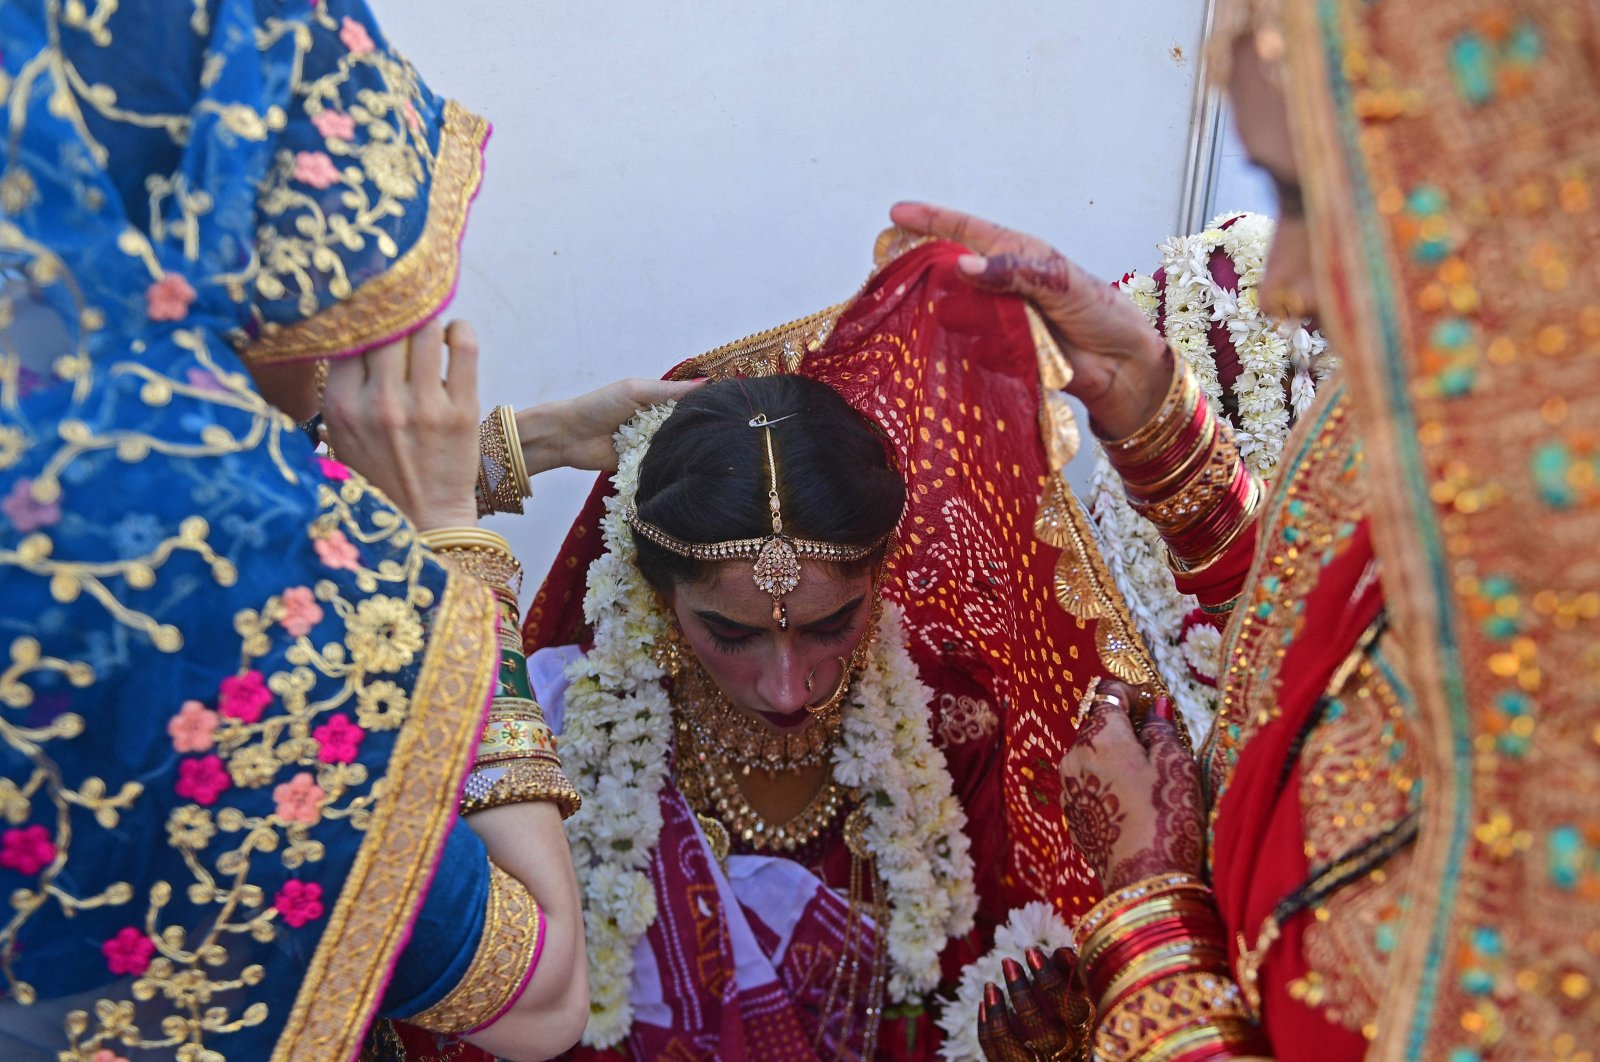 Despite the high wedding costs, Pakistanis eagerly anticipate festivities to embrace tradition. (AFP Photo)